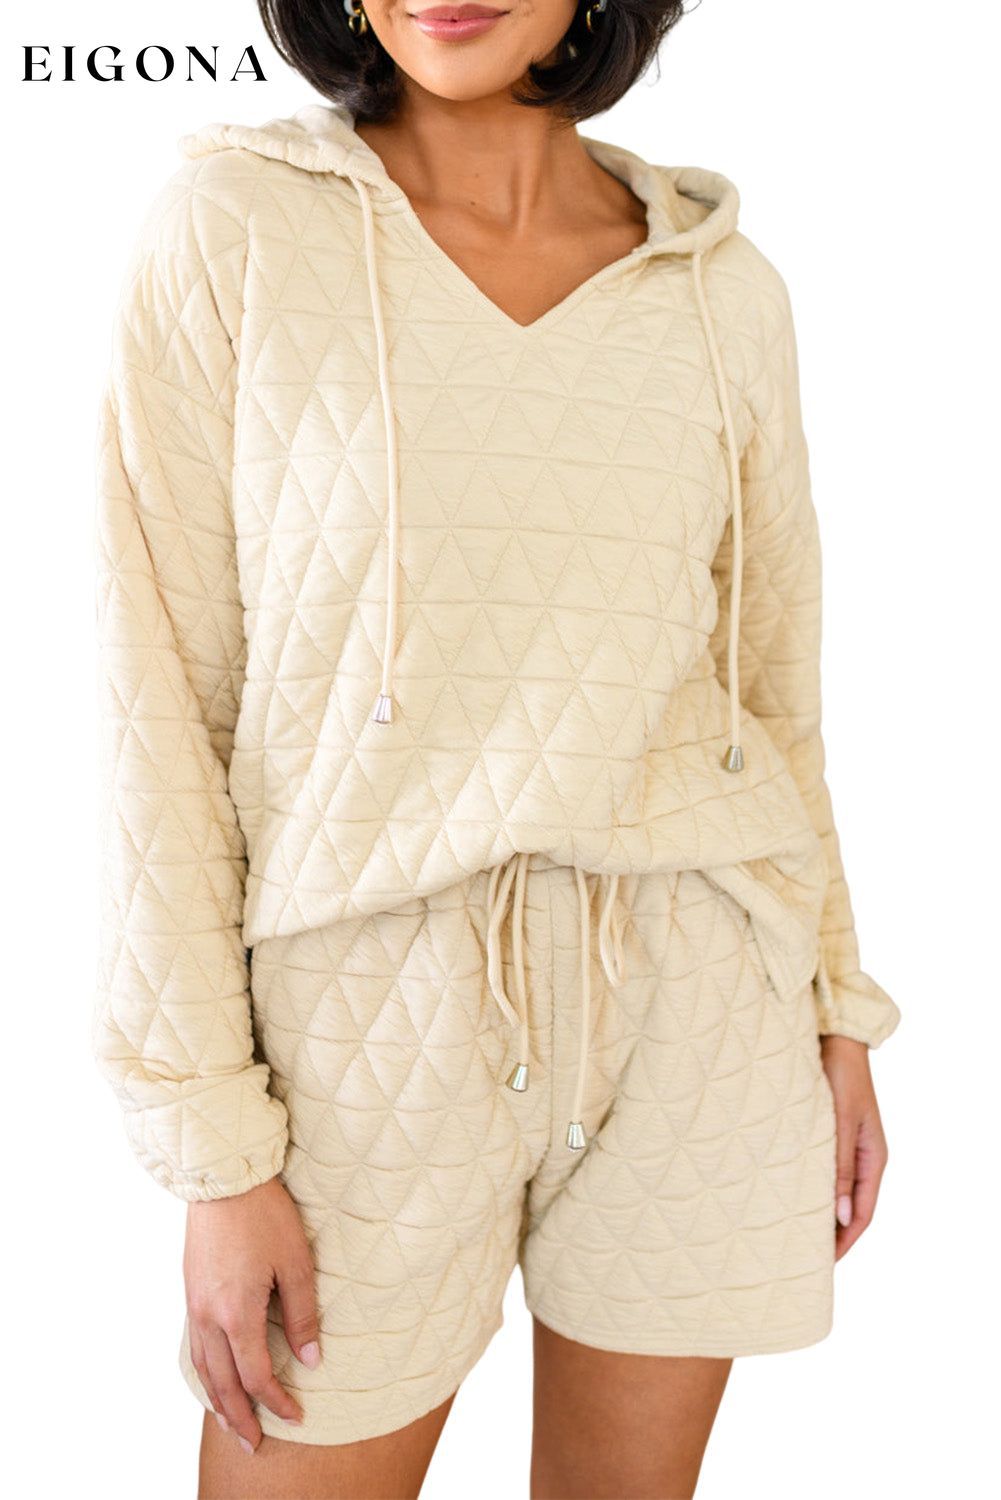 Beige Quilted V Neck Hoodie Drawstring Shorts Set, Loungewear Sets clothes lounge wear lounge wear sets loungewear loungewear sets sets